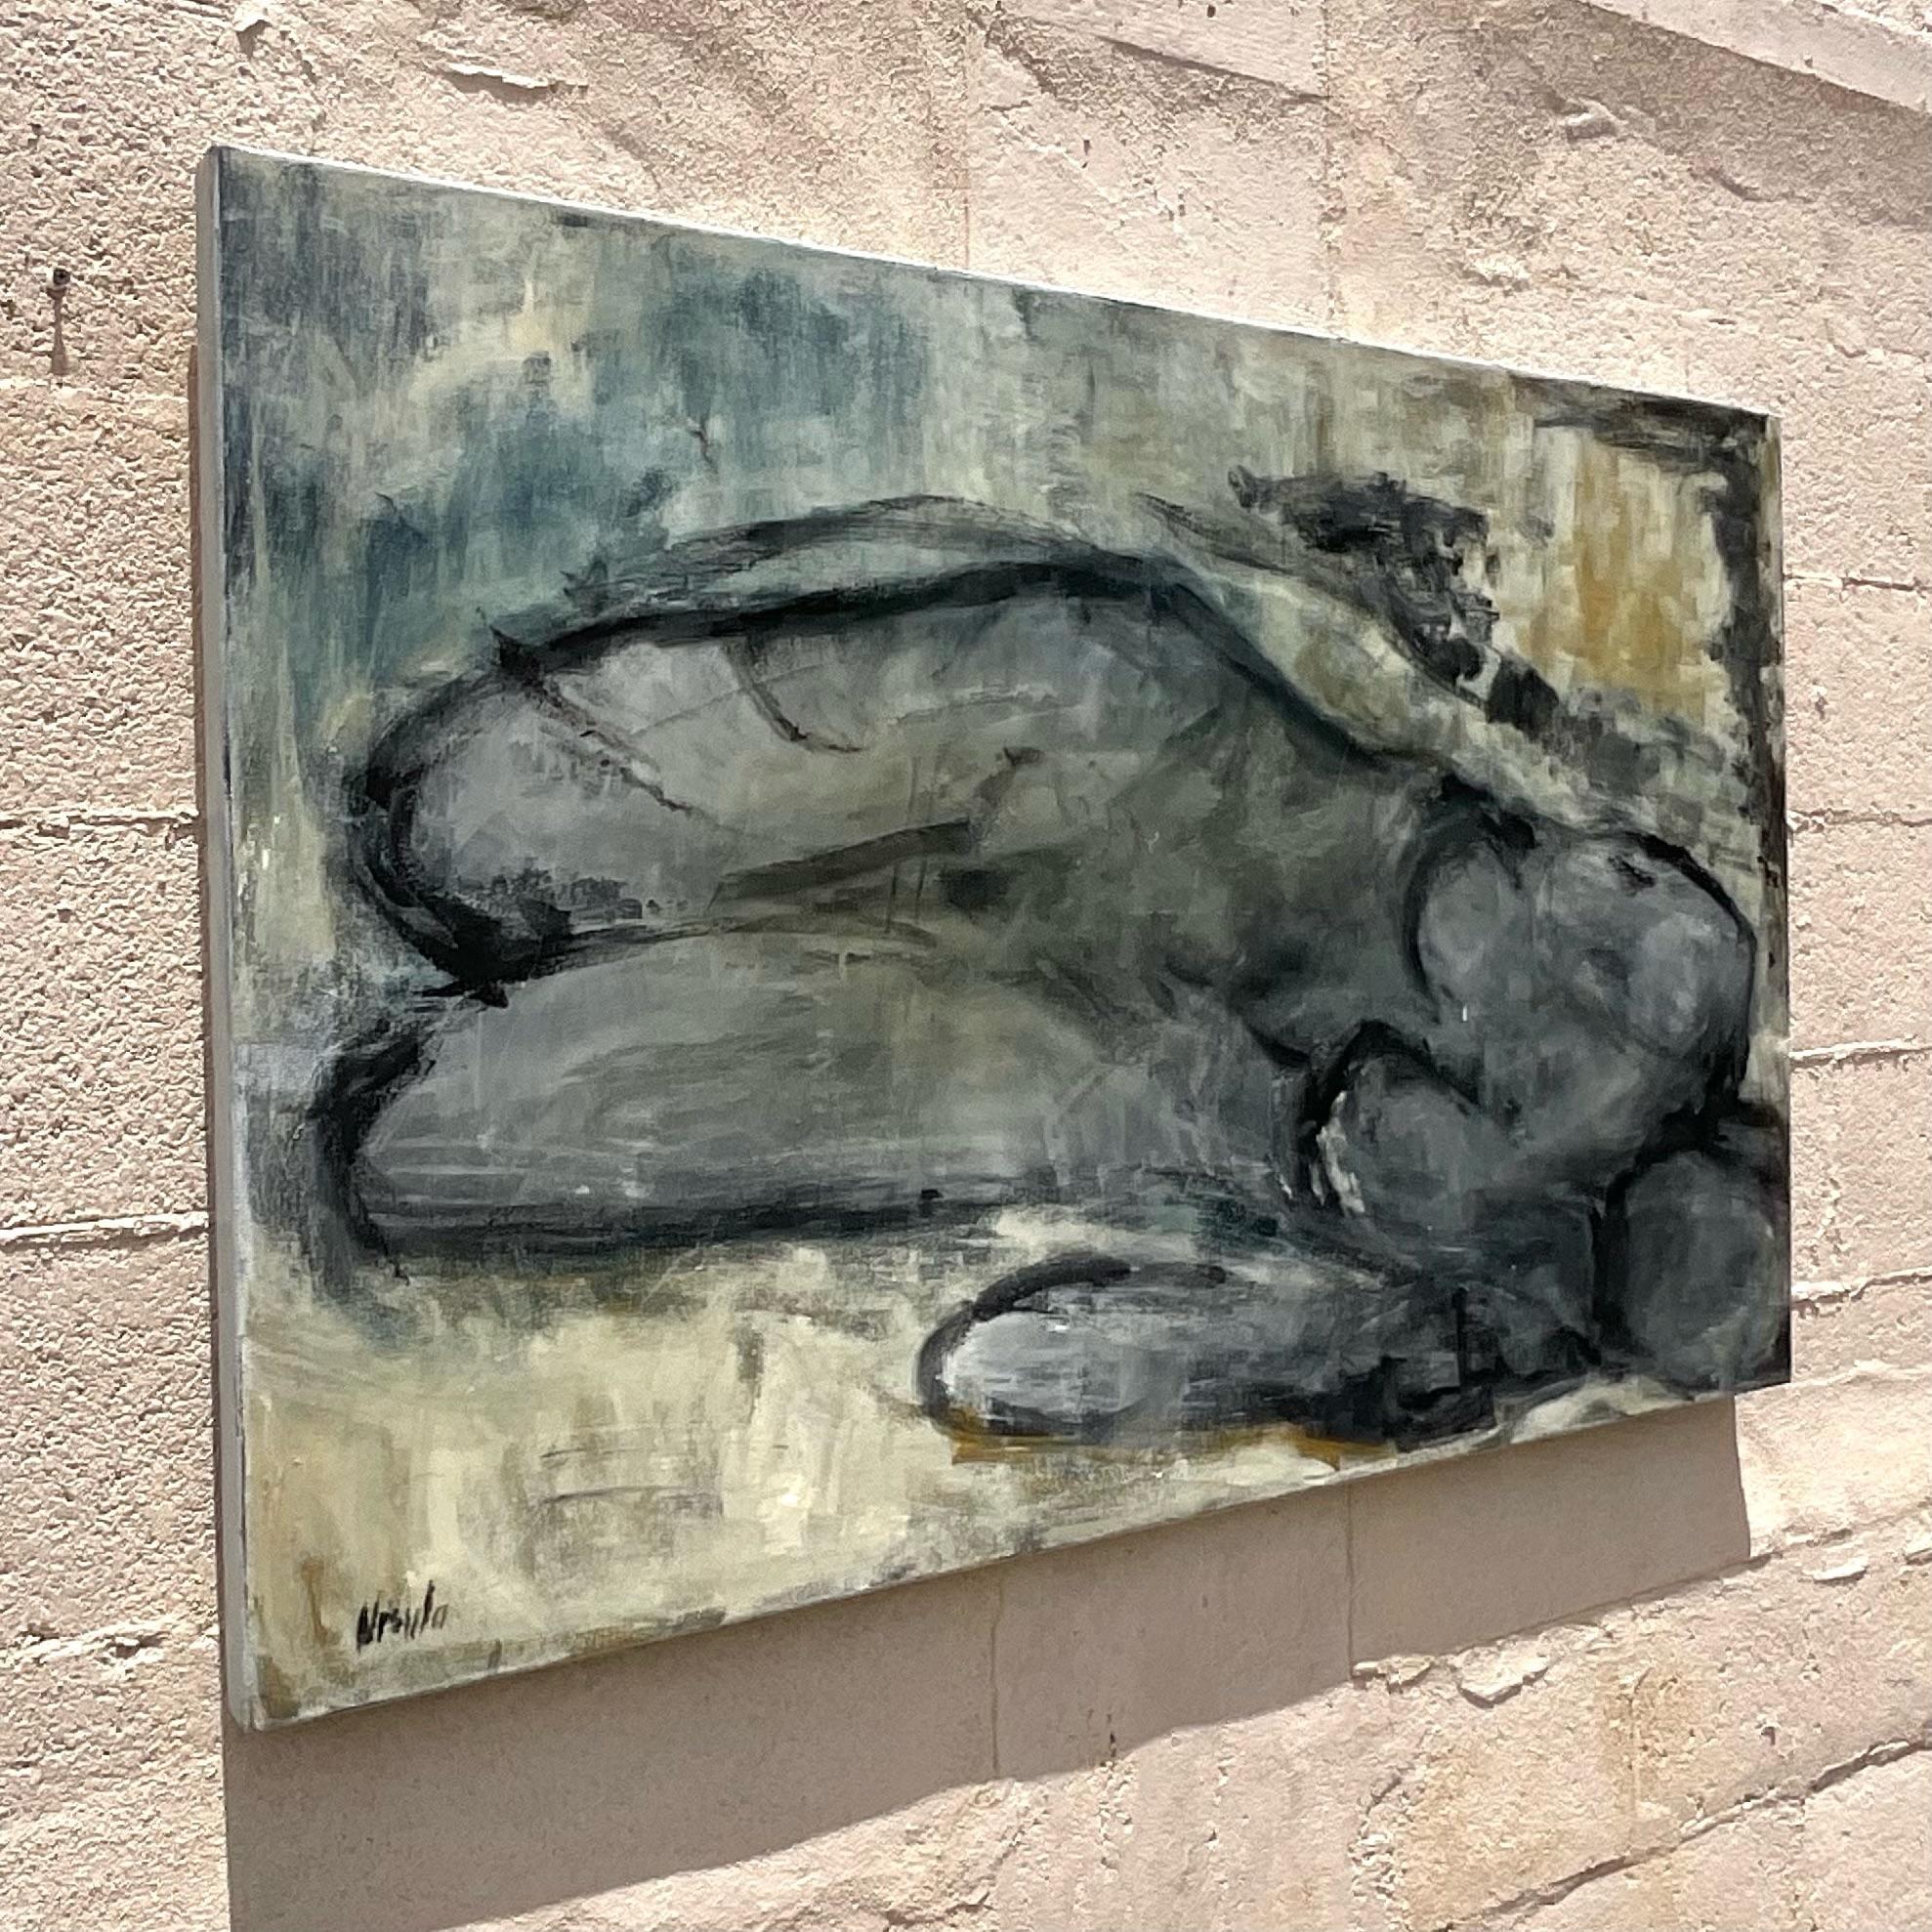 Vintage abstract of a recumbent woman on canvas. This emotional piece is beautiful in it’s simplicity. The abstract outline of woman amongst a sea of grays and blues. She is sure to be the topic of conversation wherever she resides. The piece also